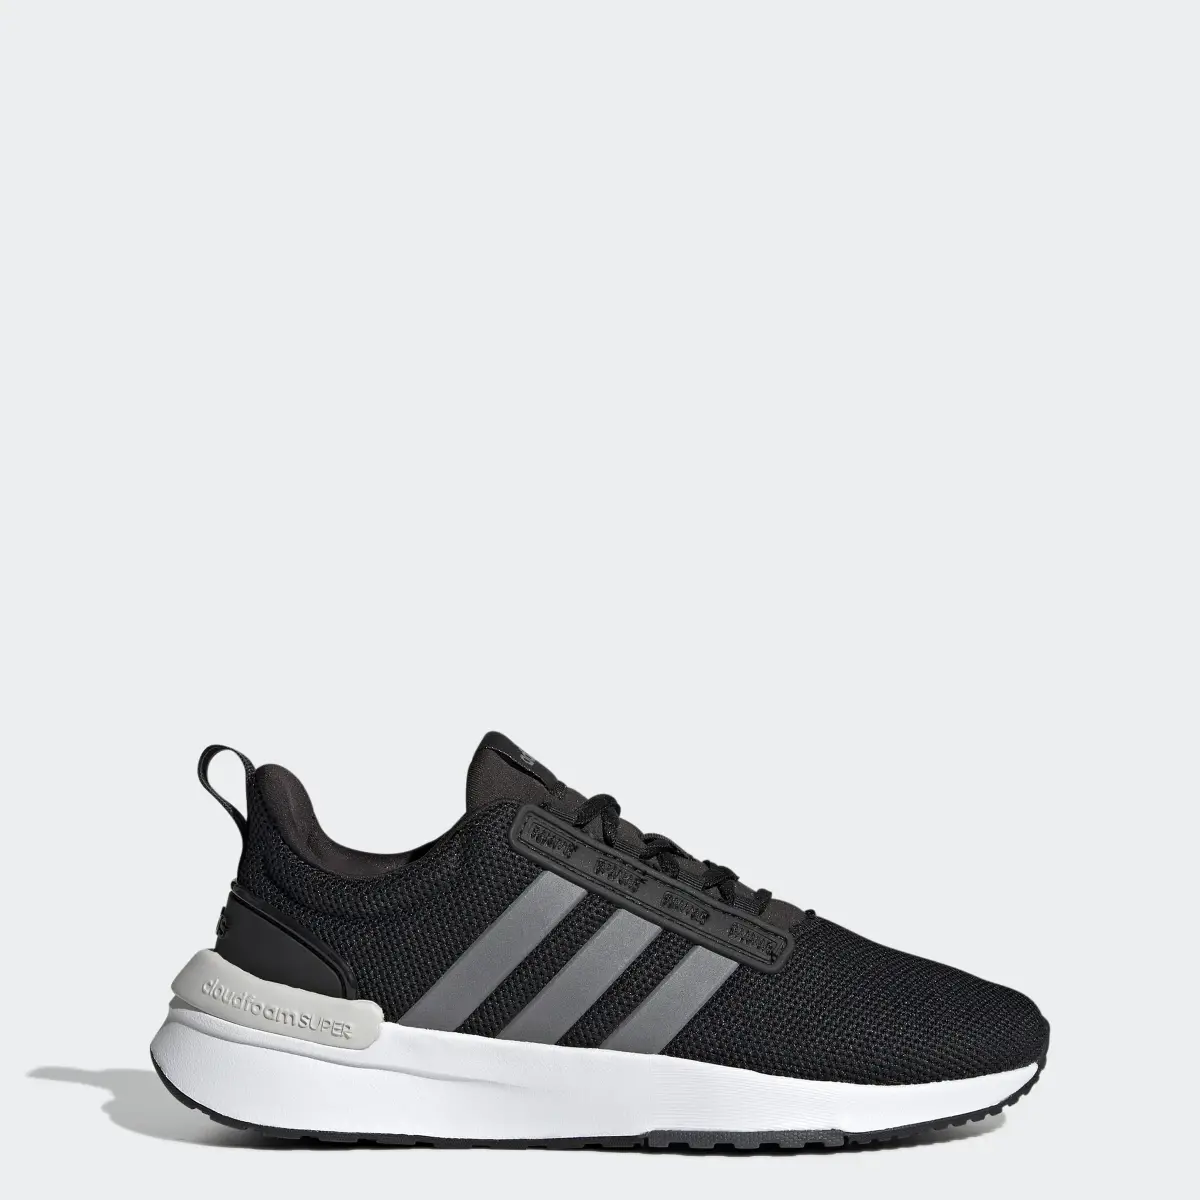 Adidas Racer TR21 Shoes. 1